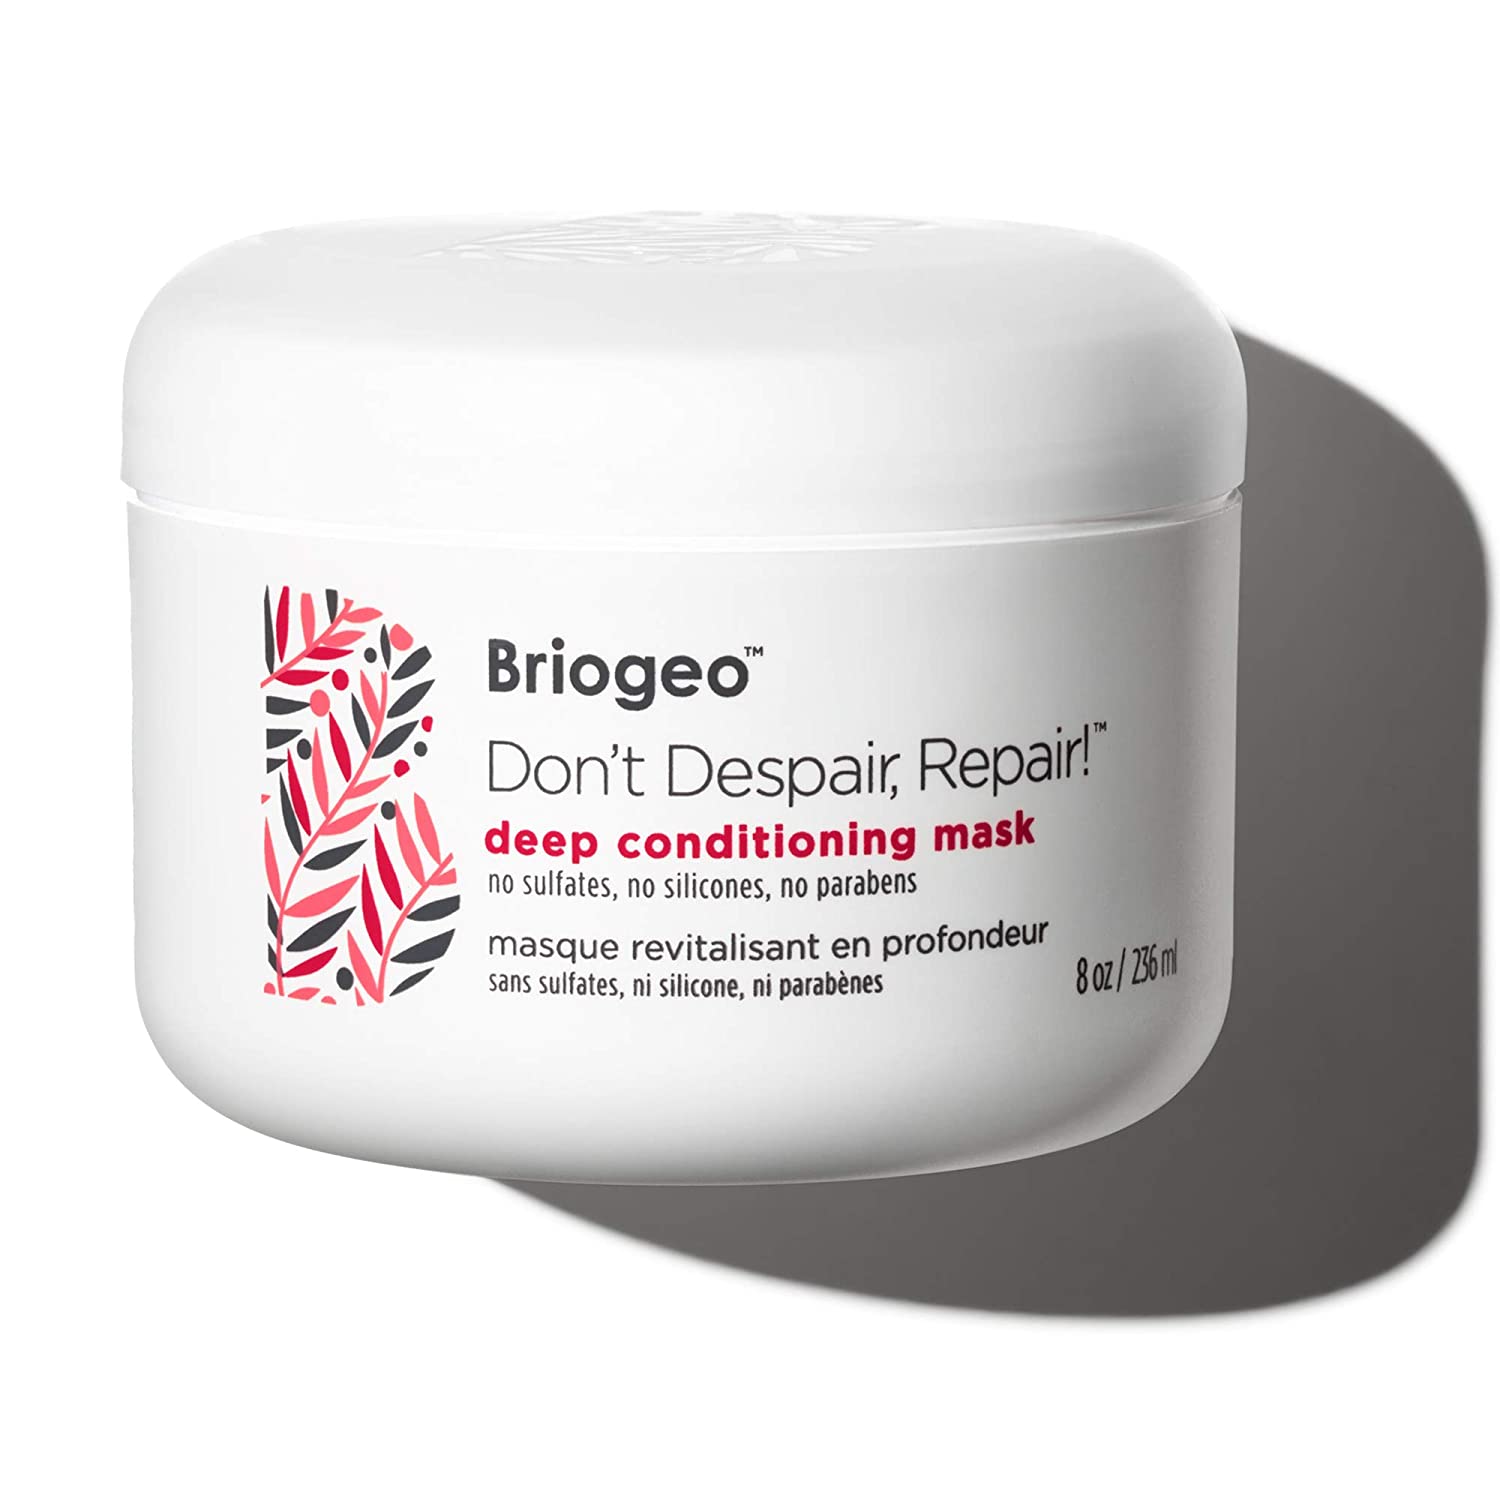  5. Briogeo's Best Hydrating: Don't Give Up, Repair! Mask for Deep Conditioning 